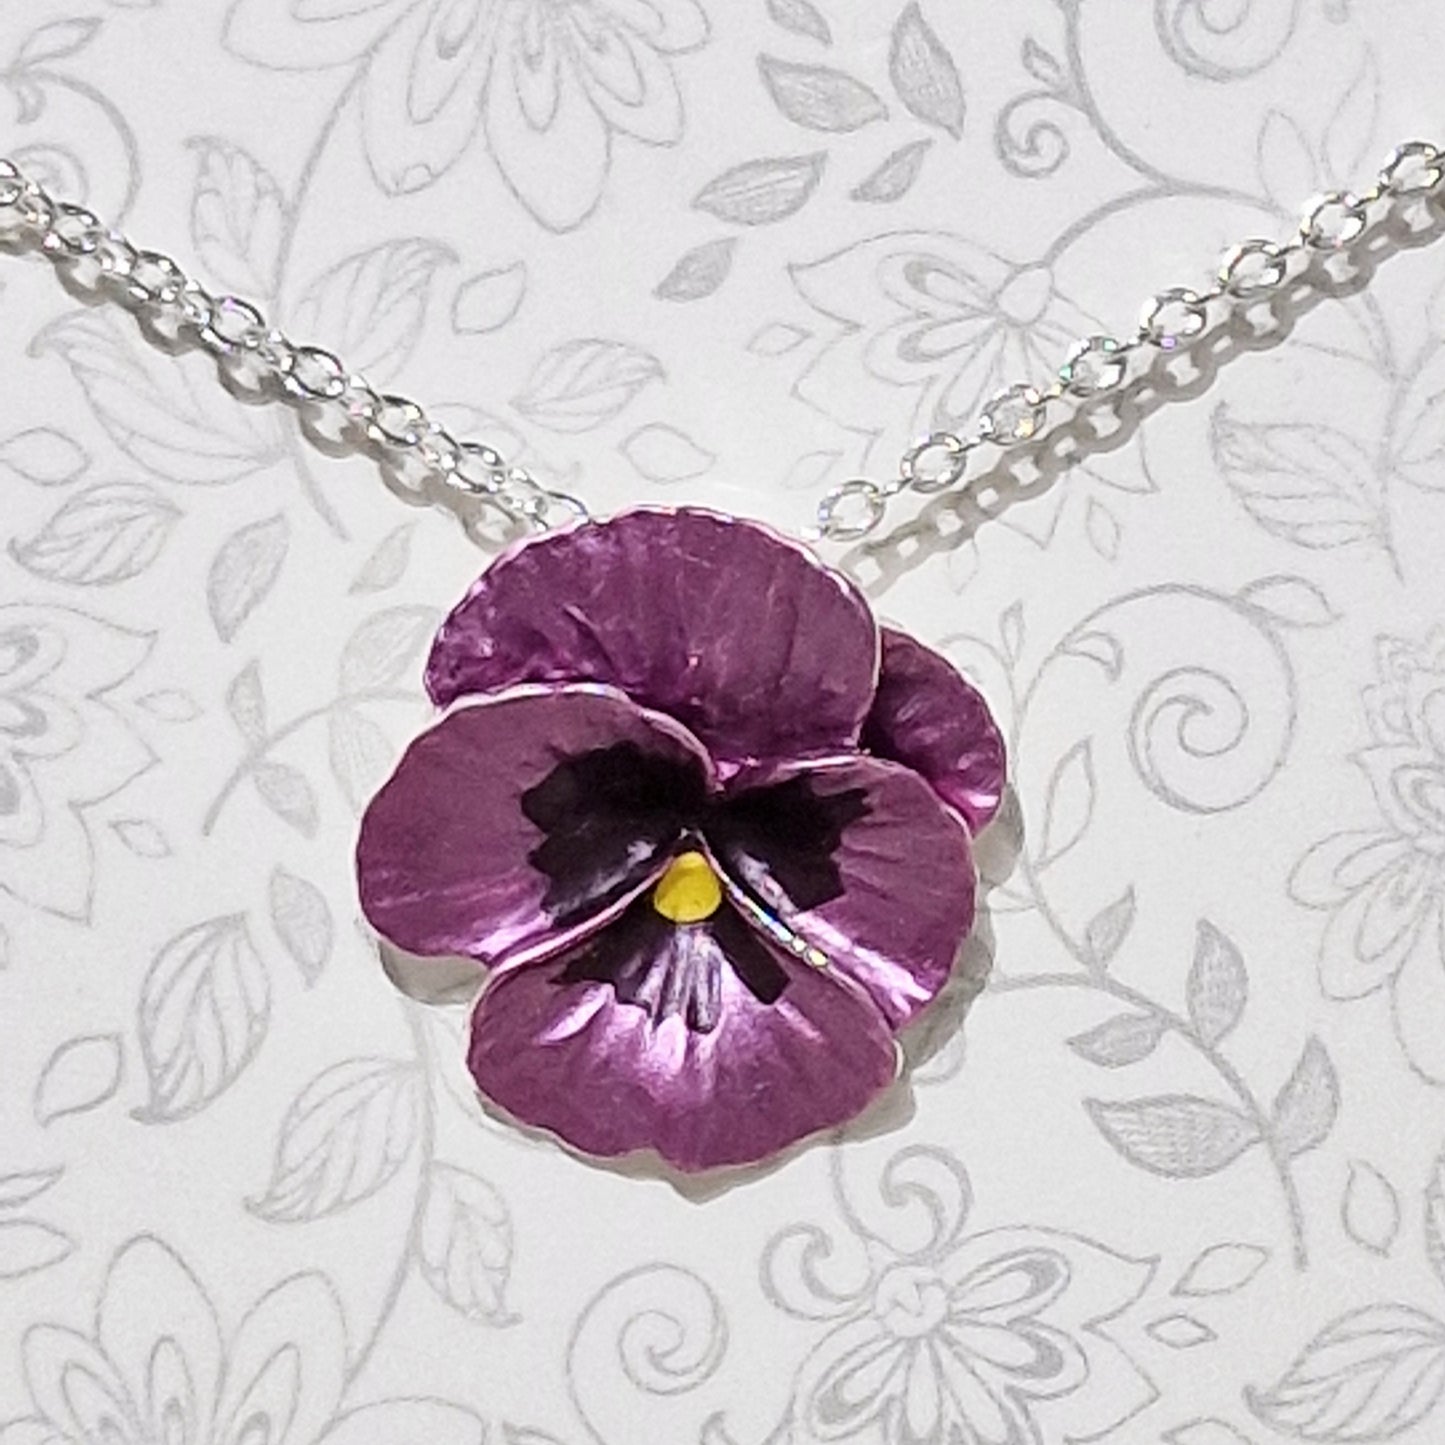 Pansy Flower Lilac Pendant Necklace